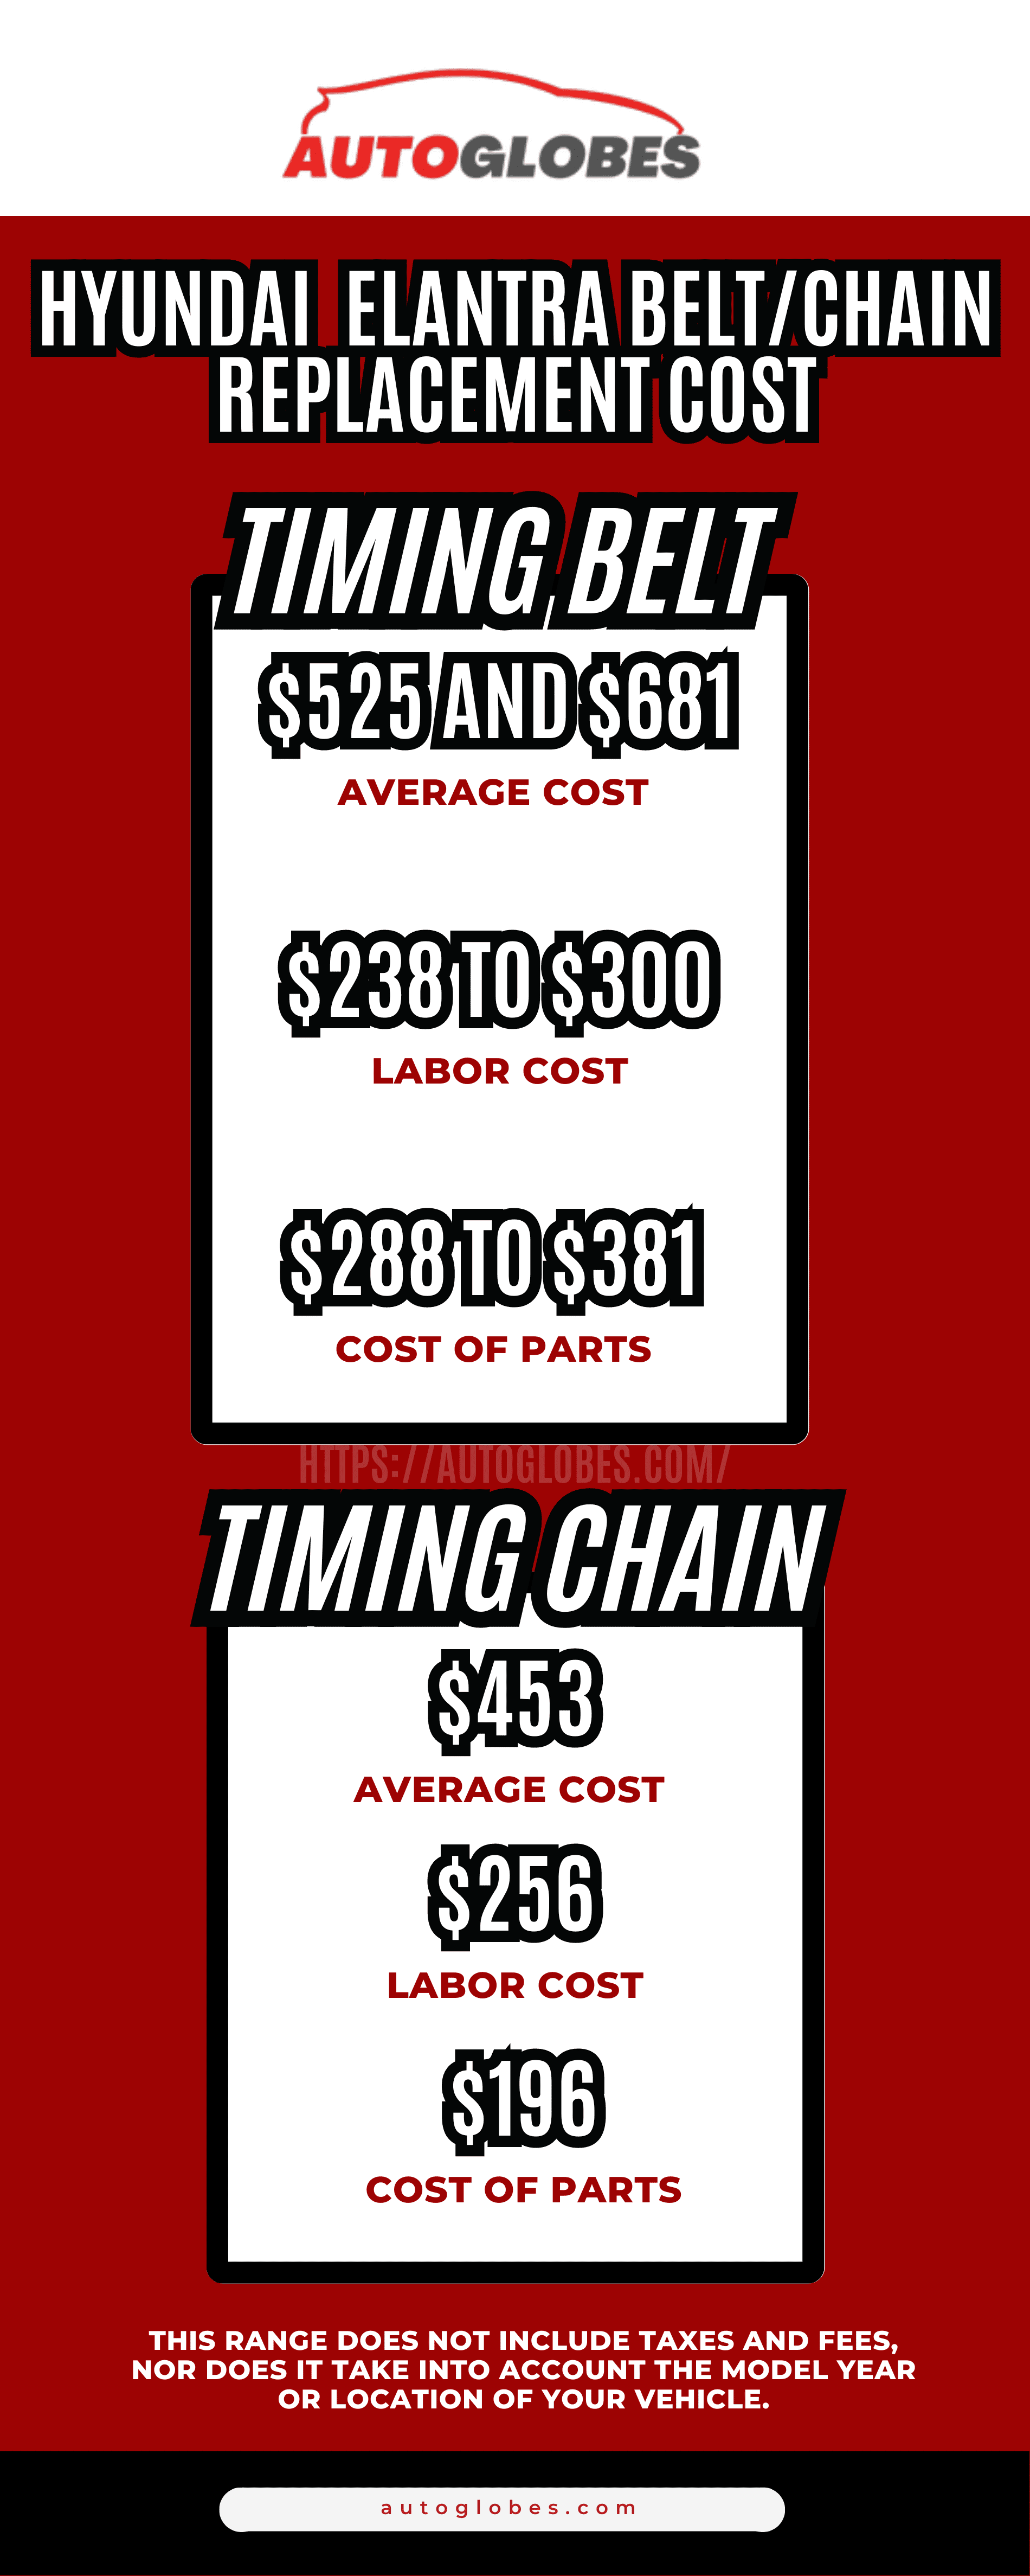 hyundai elantra beltchain replacement cost Infographic